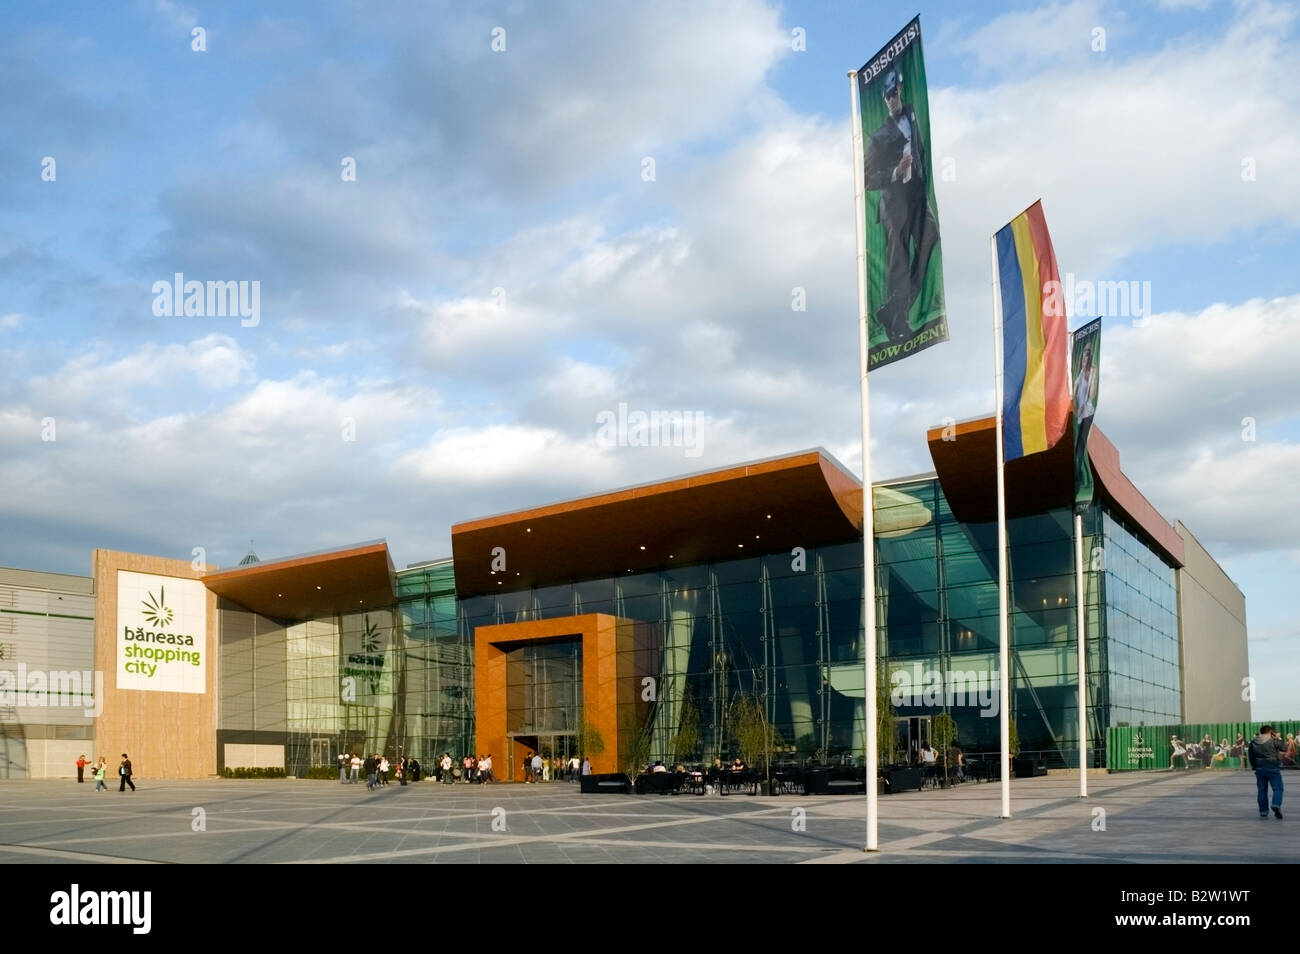 Baneasa new modern and contemporary exterior of shopping centre mall and square with flags, Bucharest, Romania, Europe, EU Stock Photo